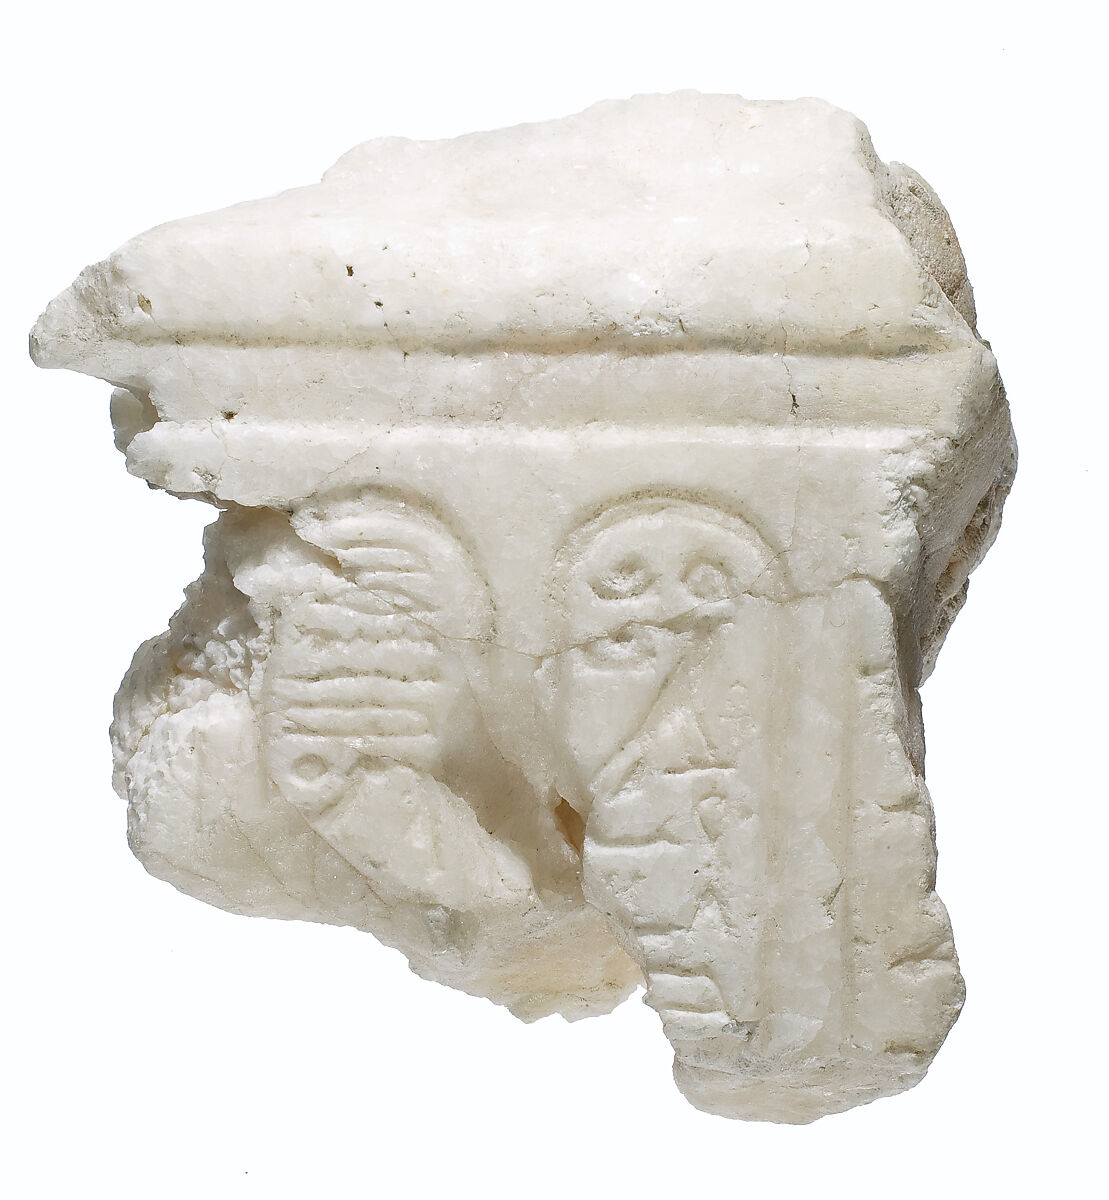 Balustrade fragment with cartouches of the Aten, Travertine (Egyptian alabaster) 